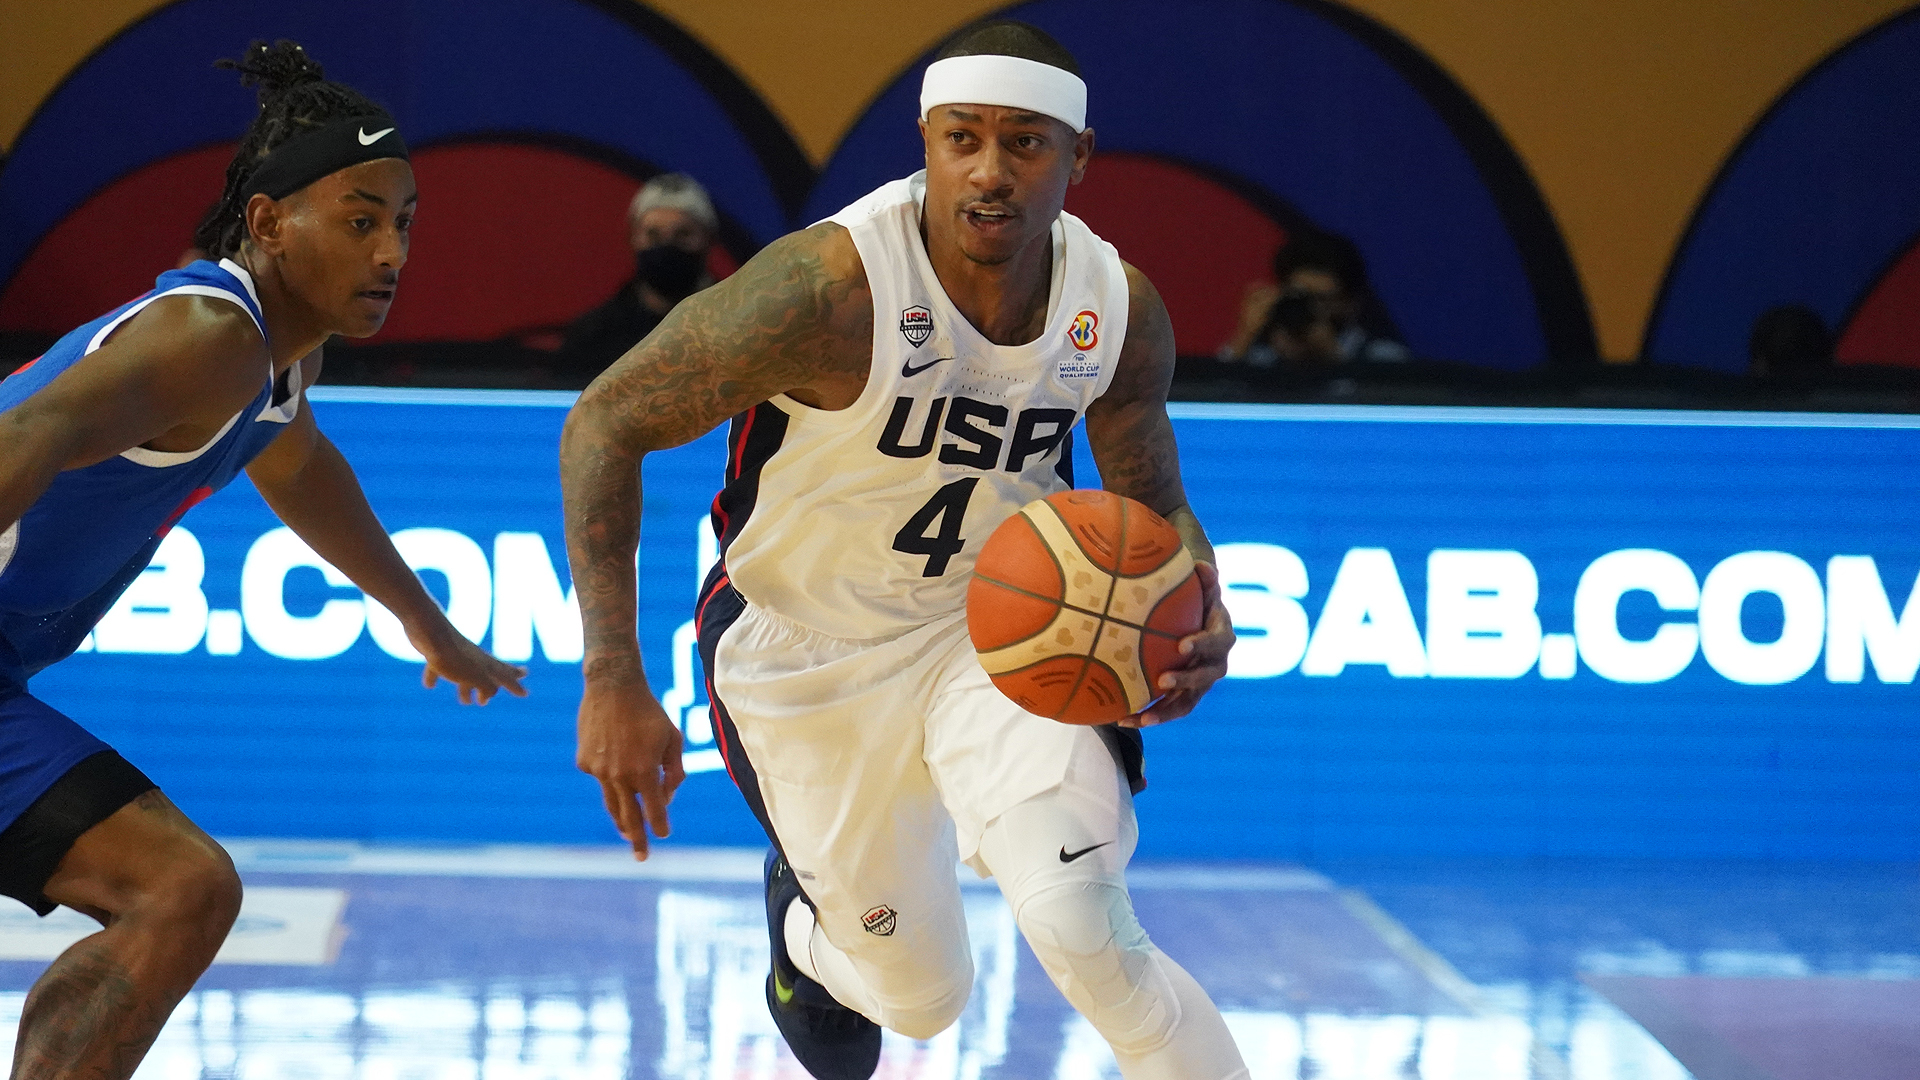 U.S. men's basketball players downplayed Cuba in World Cup qualifier